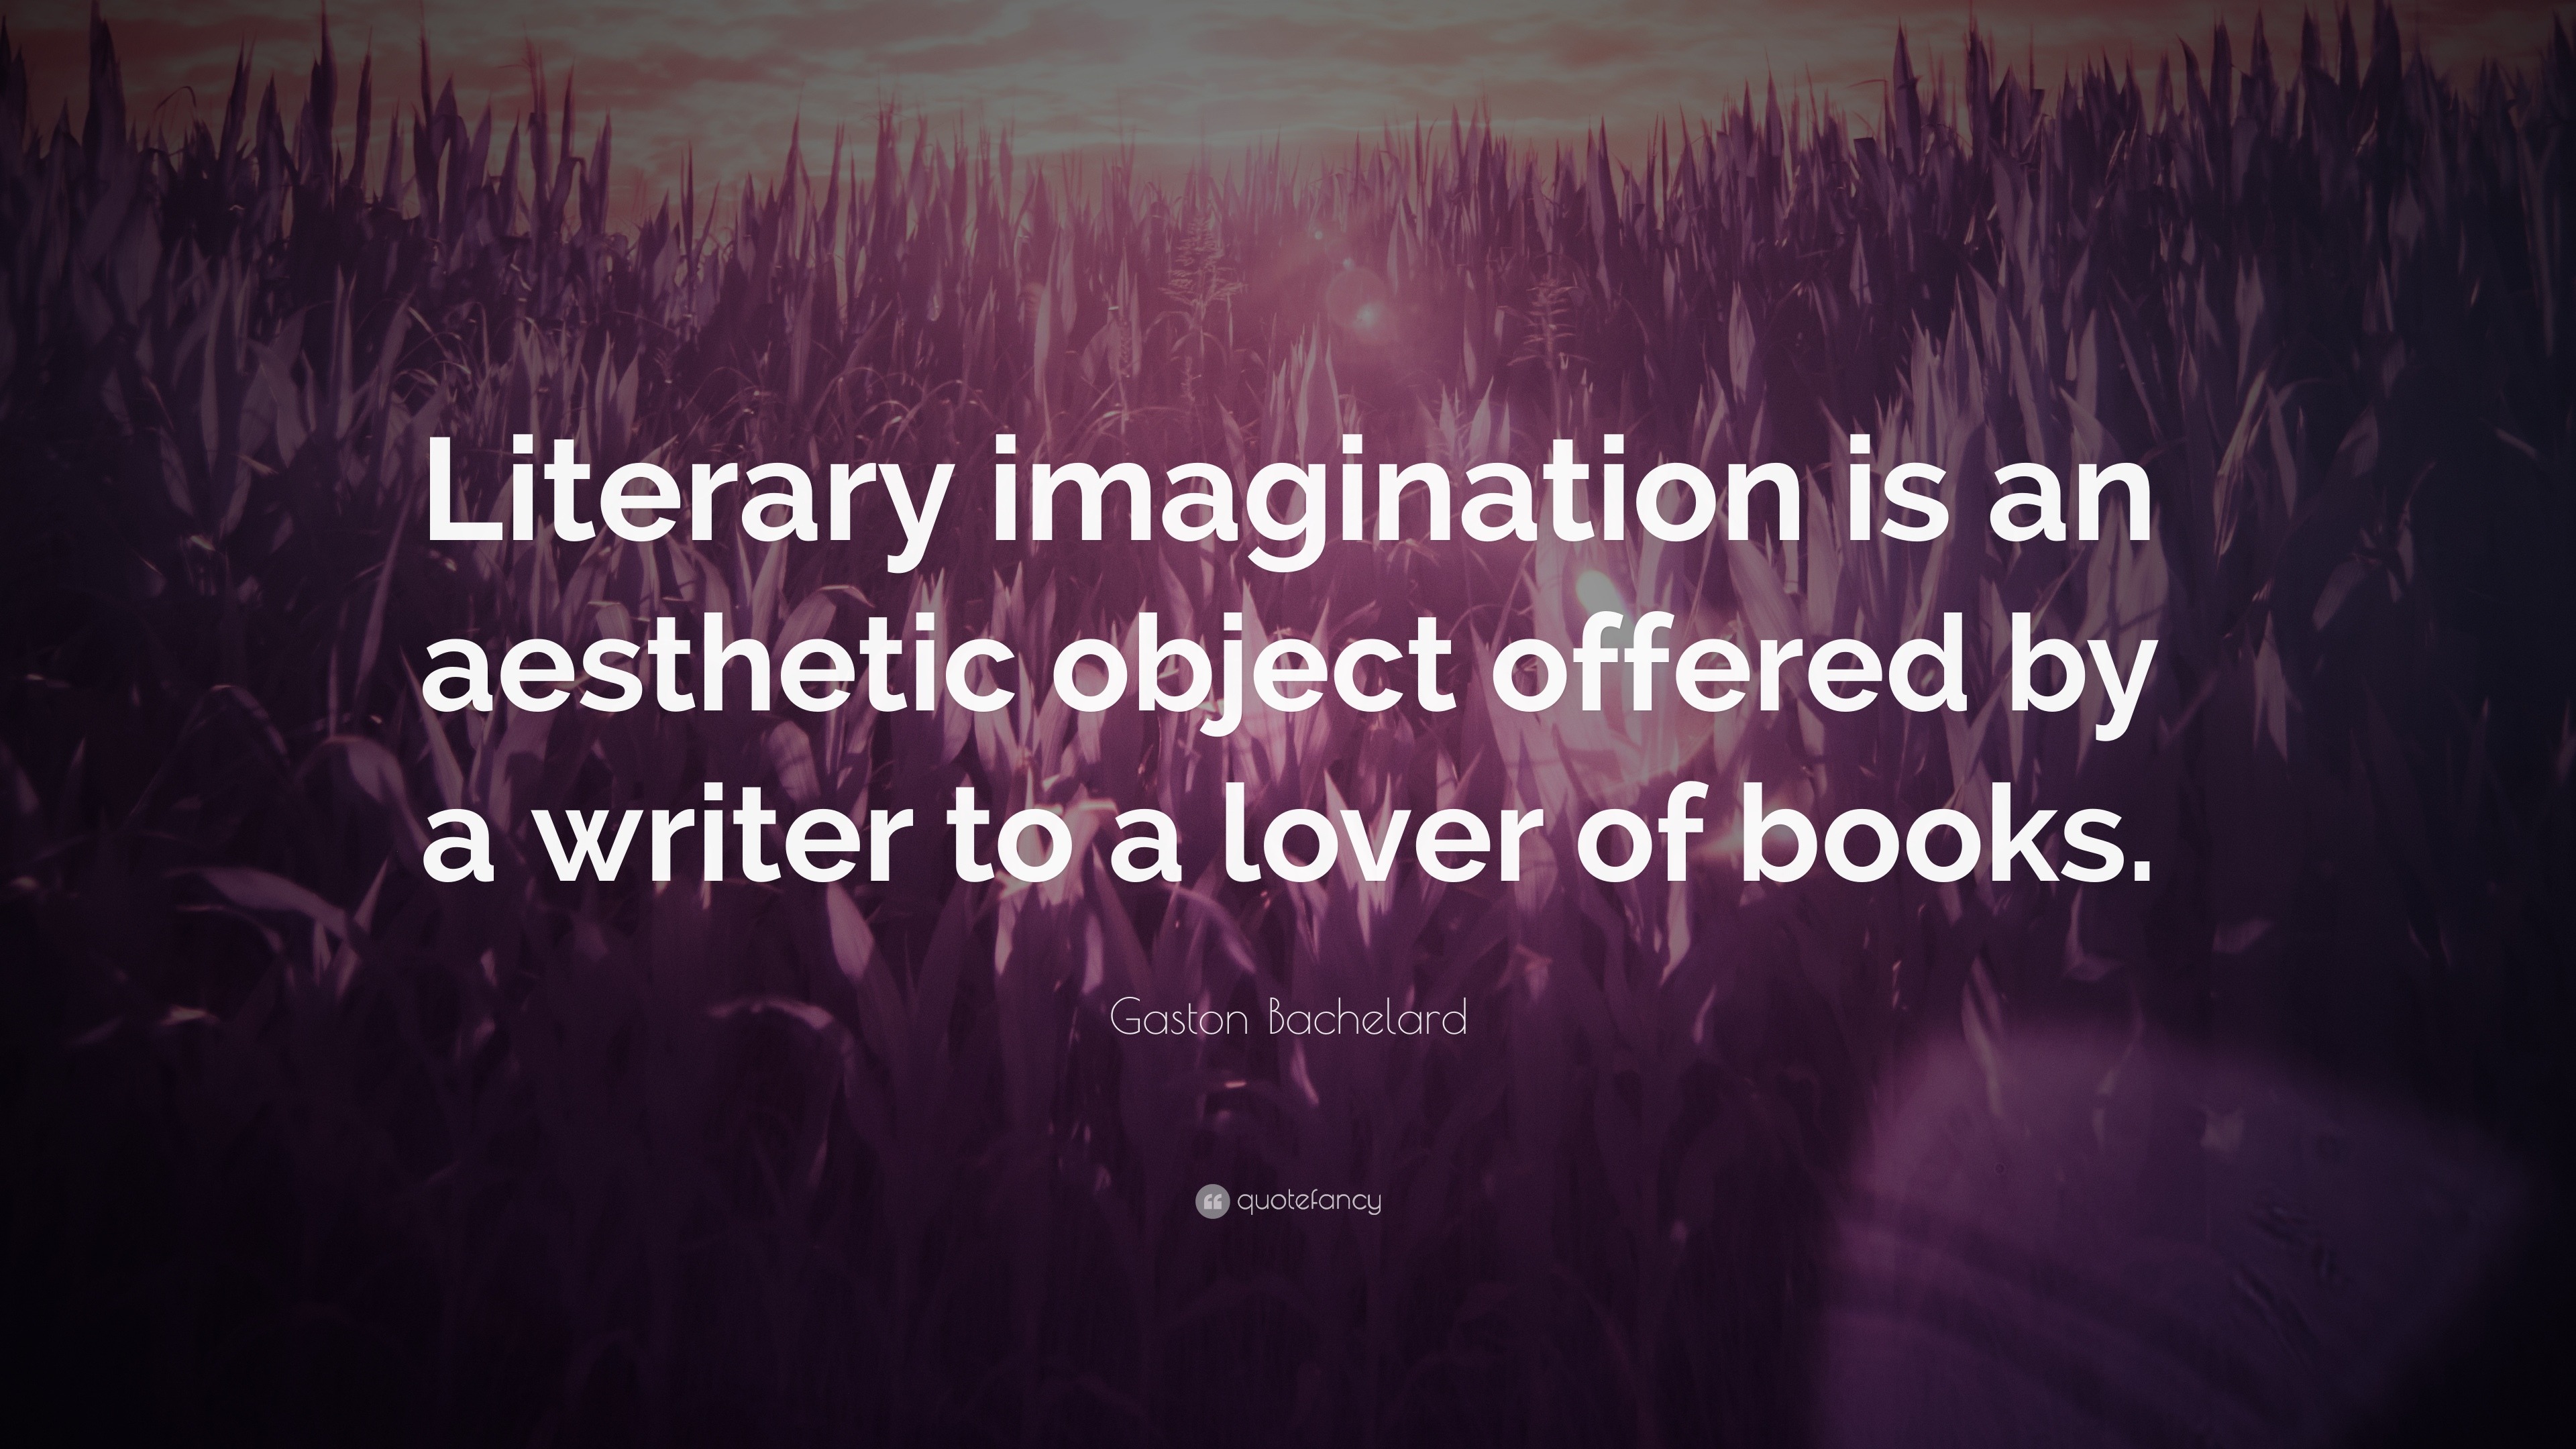 Gaston Bachelard Quote: “Literary imagination is an aesthetic object  offered by a writer to a lover